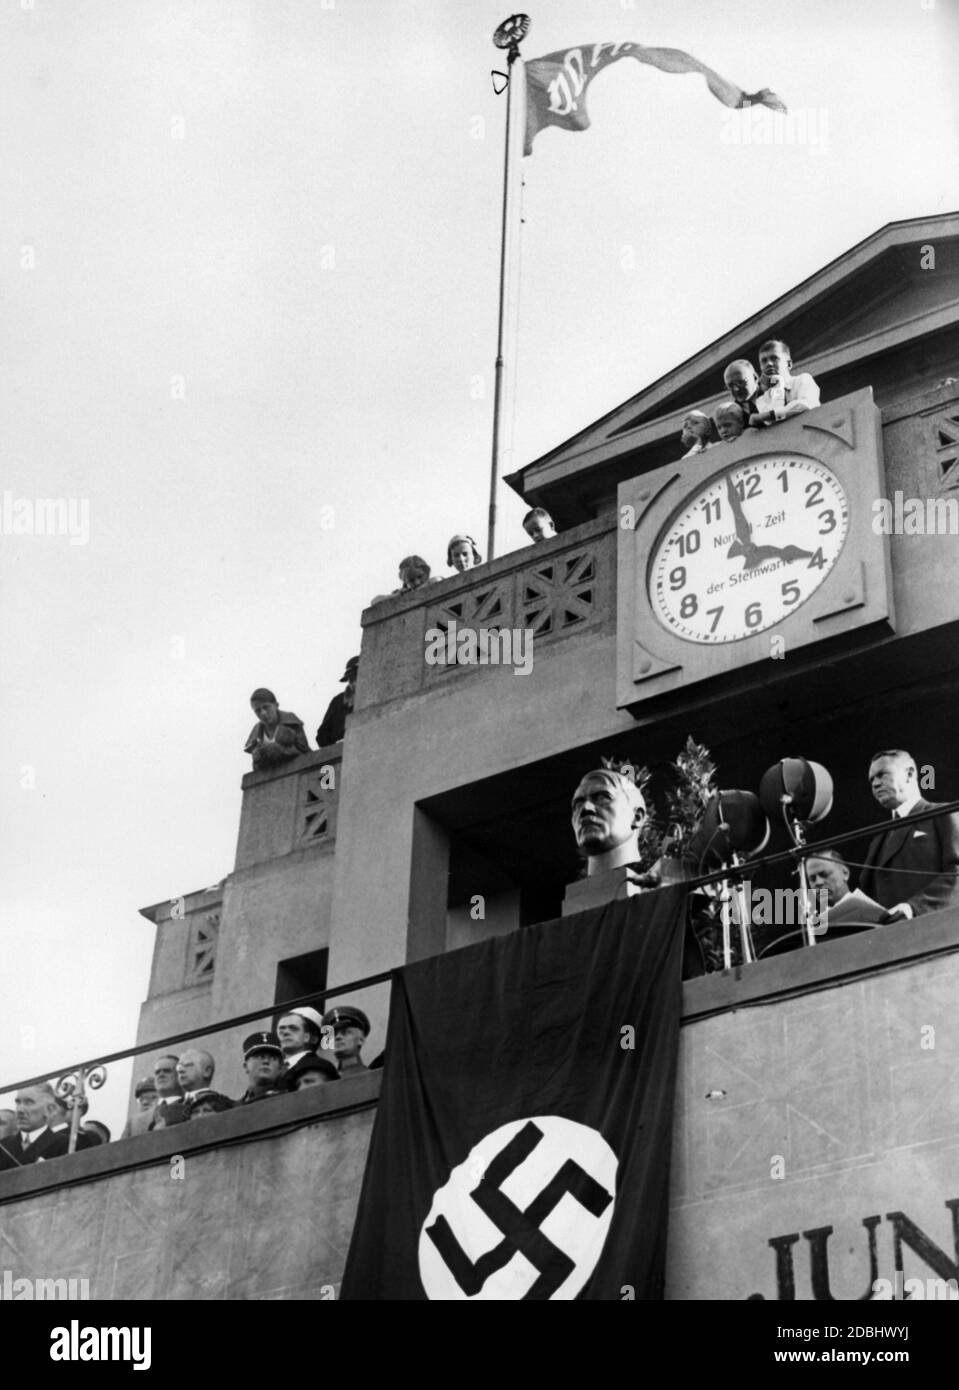 'At the ''Festival of the German School'' in Berlin's Grunewald Stadium, a bust of the absent Adolf Hitler is displayed in the VIP stand above a swastika flag. Over it is a clock, set according to the observatory's standard time. On a flagpole hangs a flag of the organizer ''Volksbund fuer das Deutschtum im Ausland'', VDA.' Stock Photo